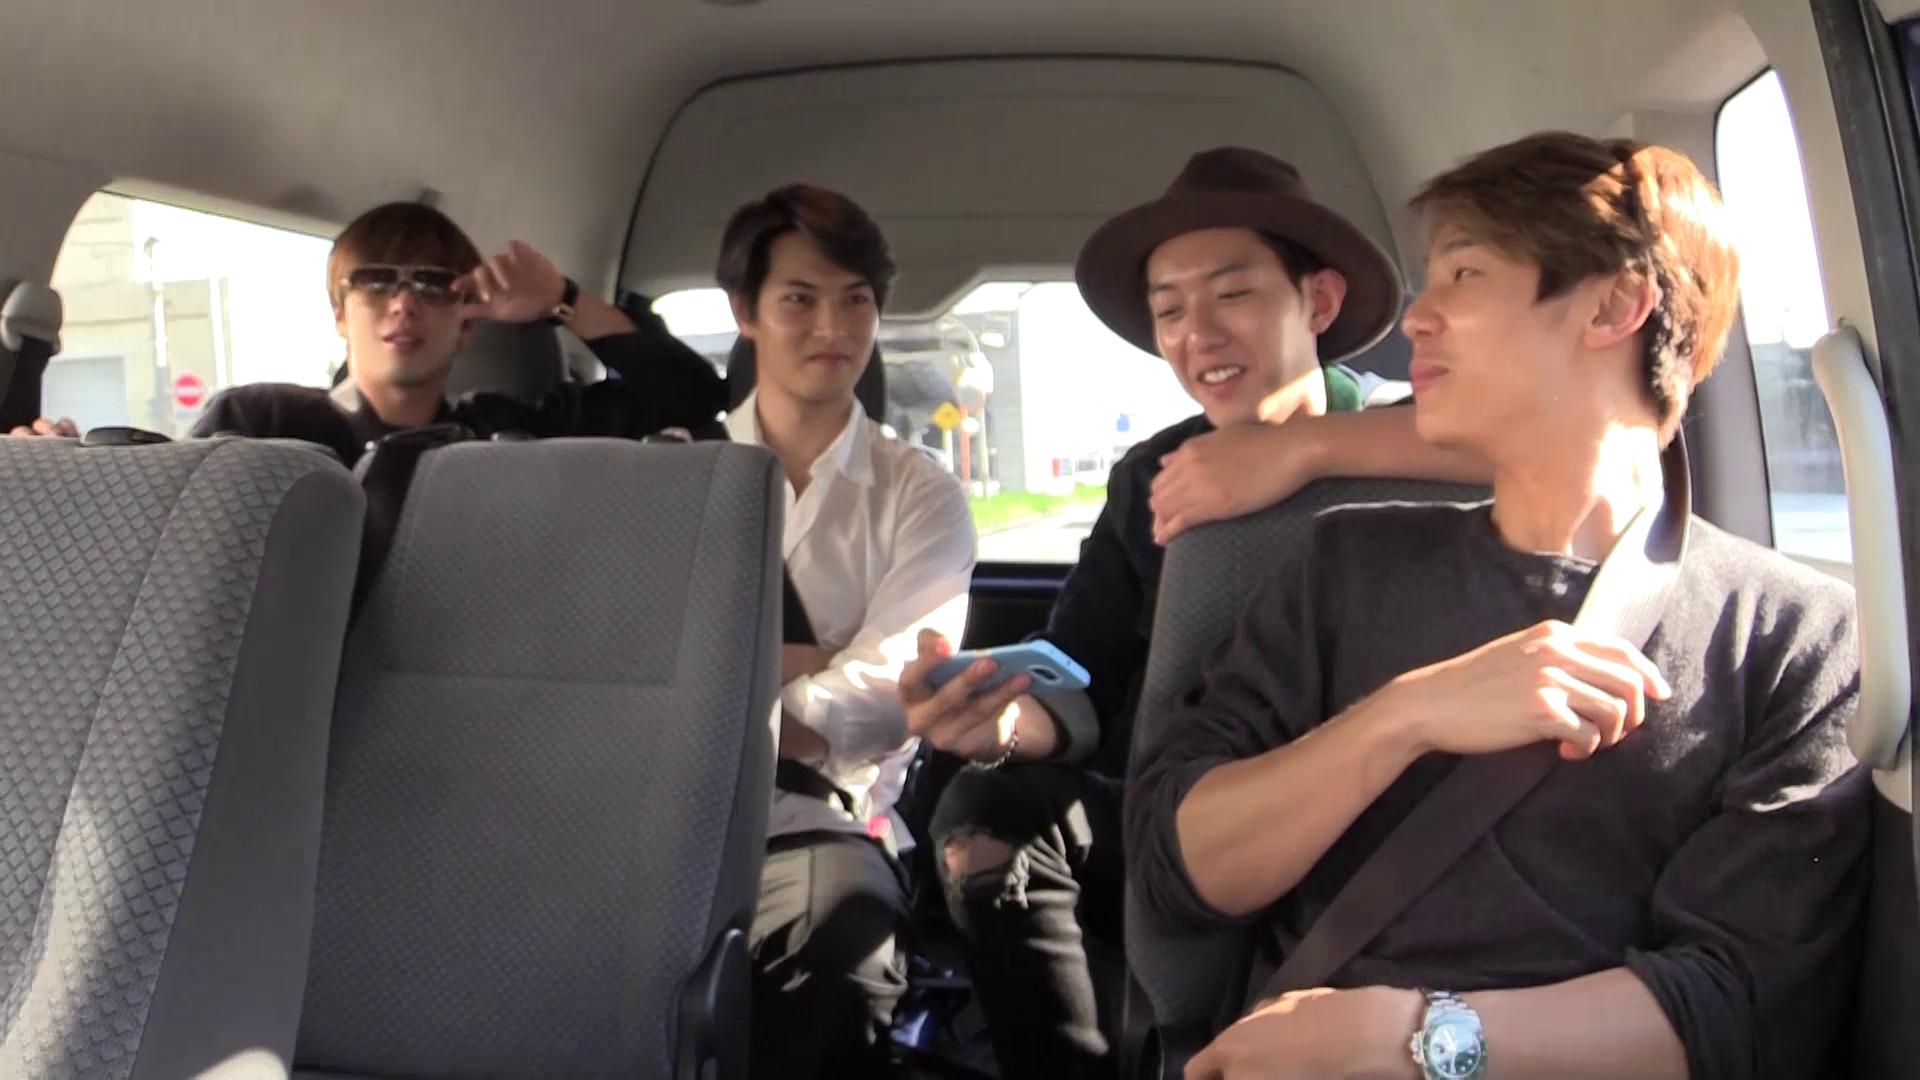 CNBLUE's way to the hotel